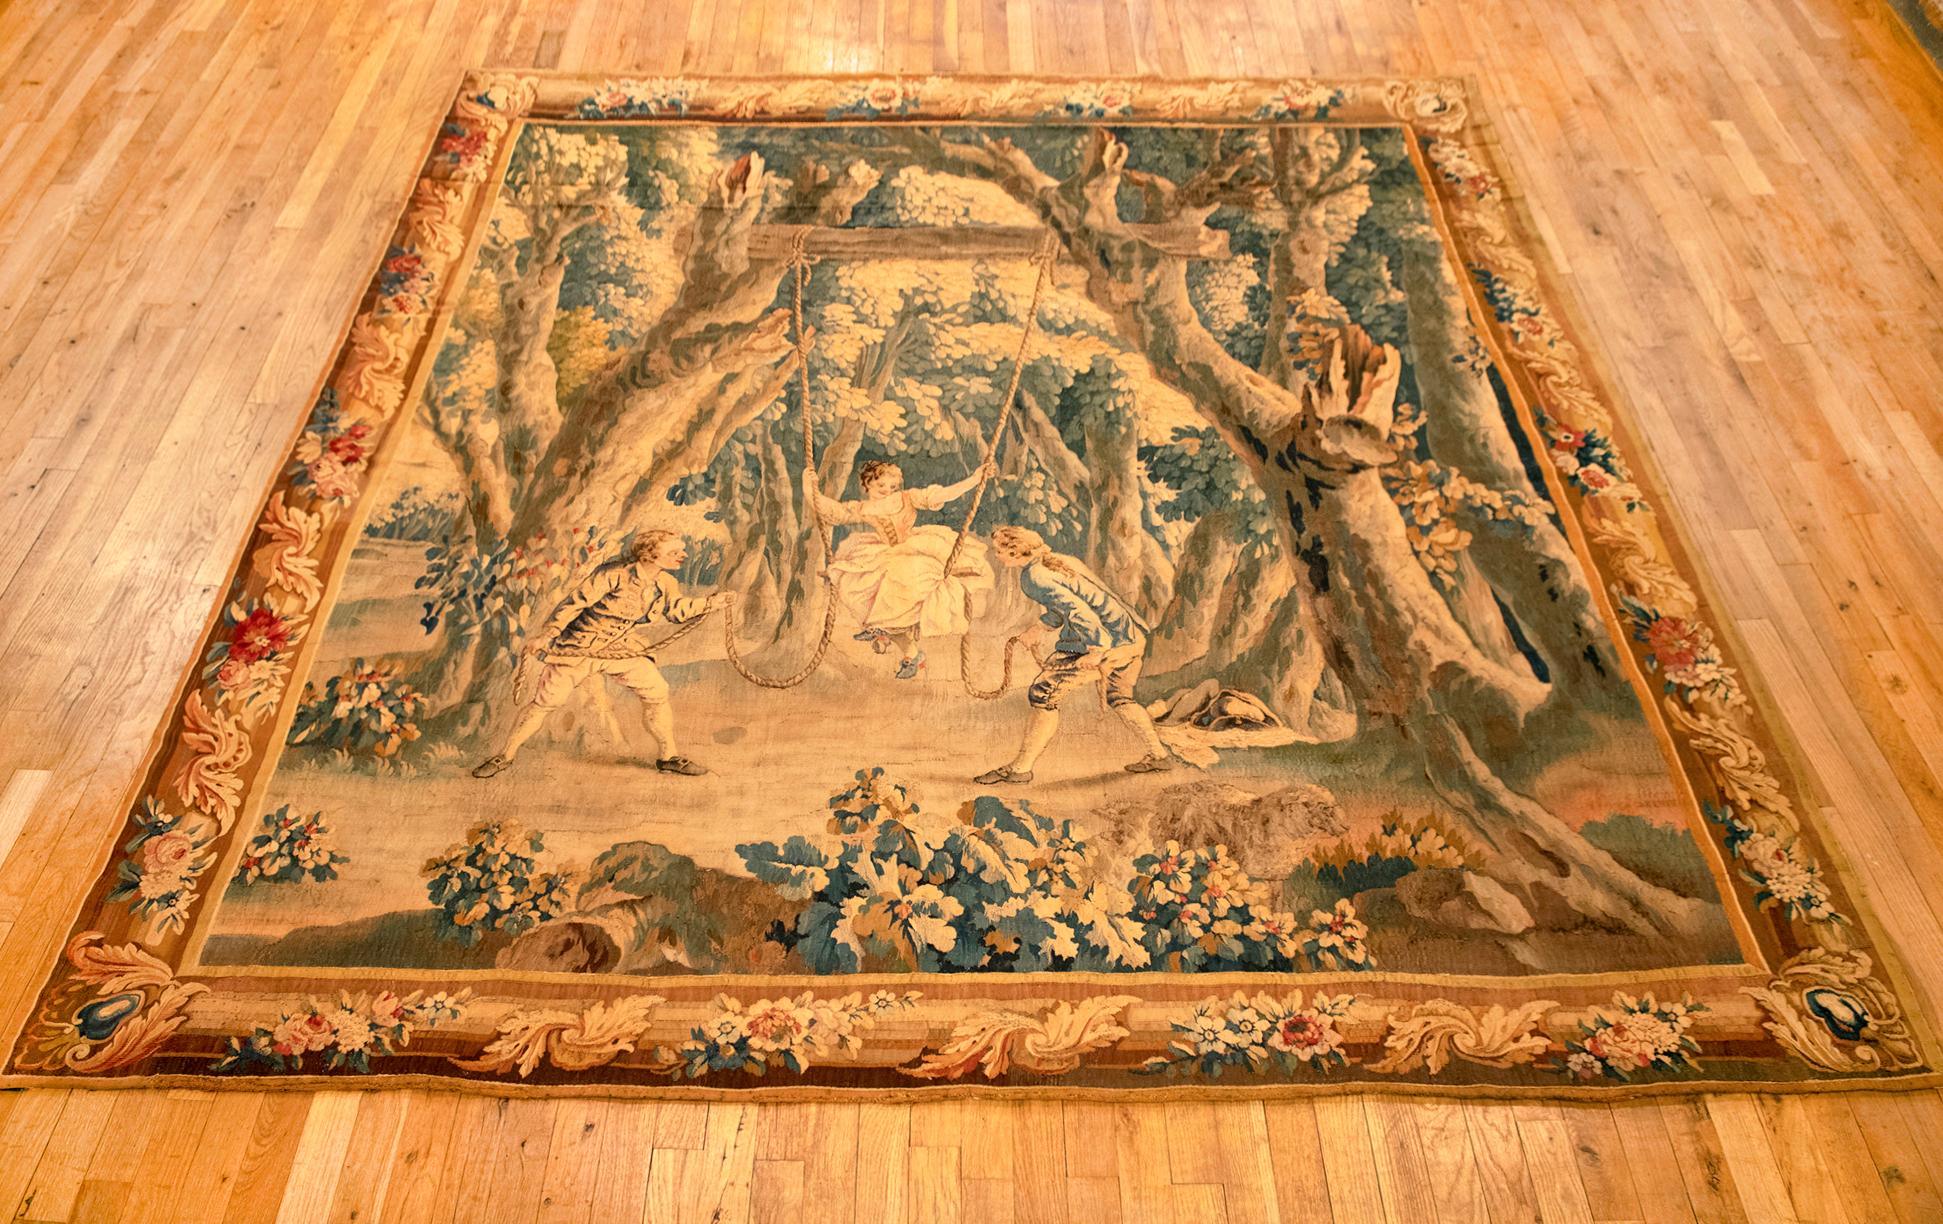 A French tapestry from the end of the 17th century, incorporating verdure and rustic elements, with a romantic scene on the foreground of two young men pulling a young girl's swing. The scene takes place in a woodland environment, with trees in the